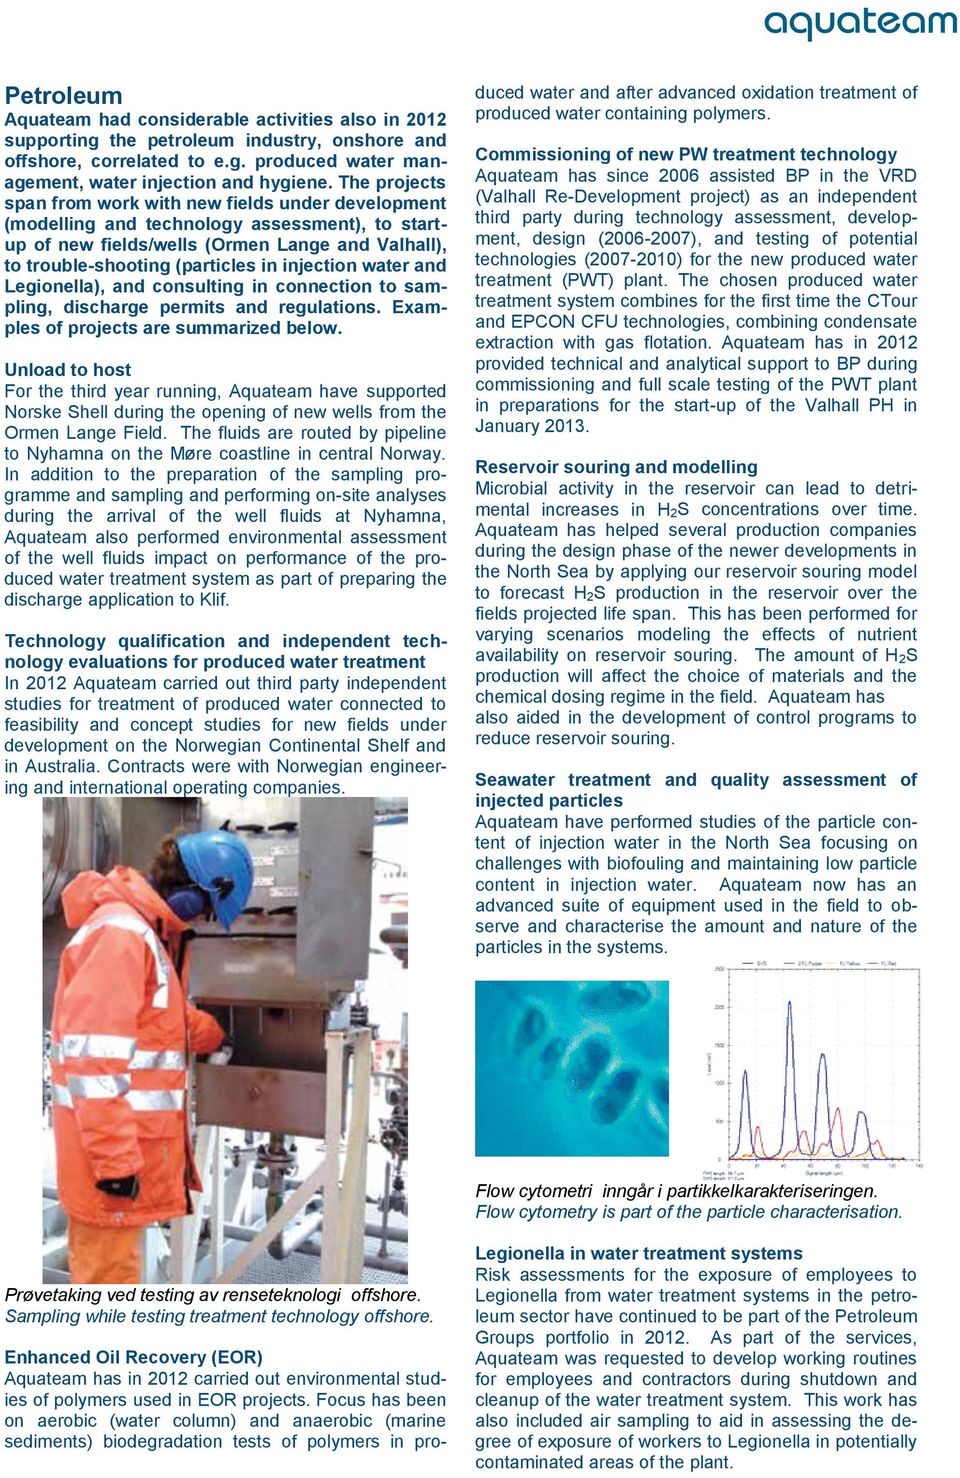 injection water and Legionella), and consulting in connection to sampling, discharge permits and regulations. Examples of projects are summarized below.